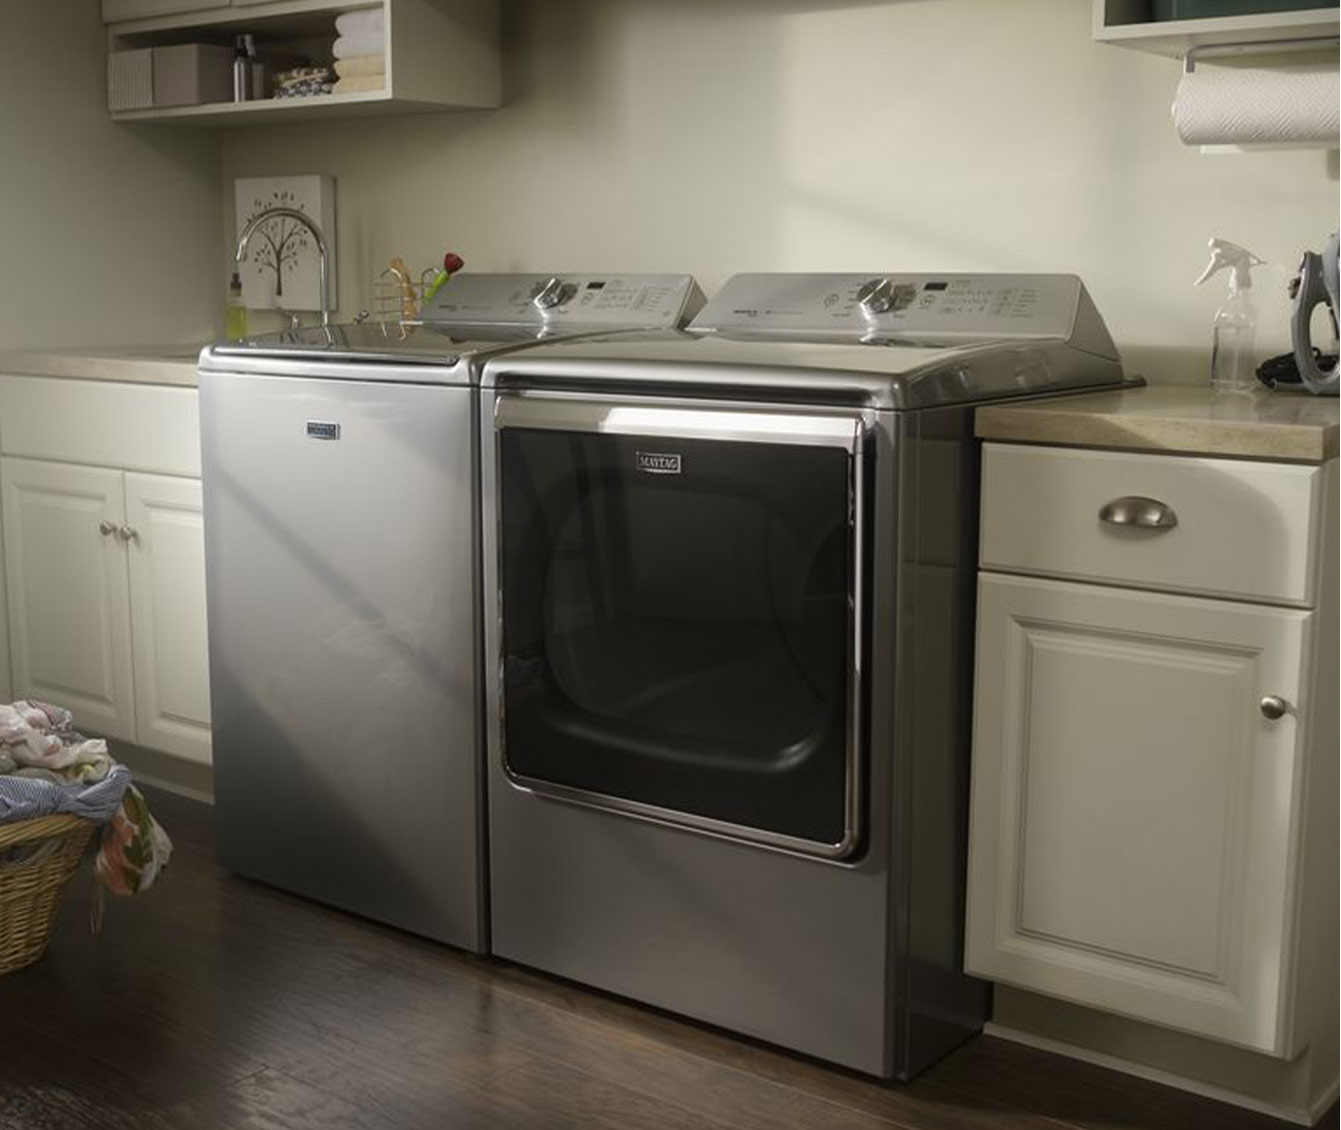 How Much To Rent A Washer And Dryer